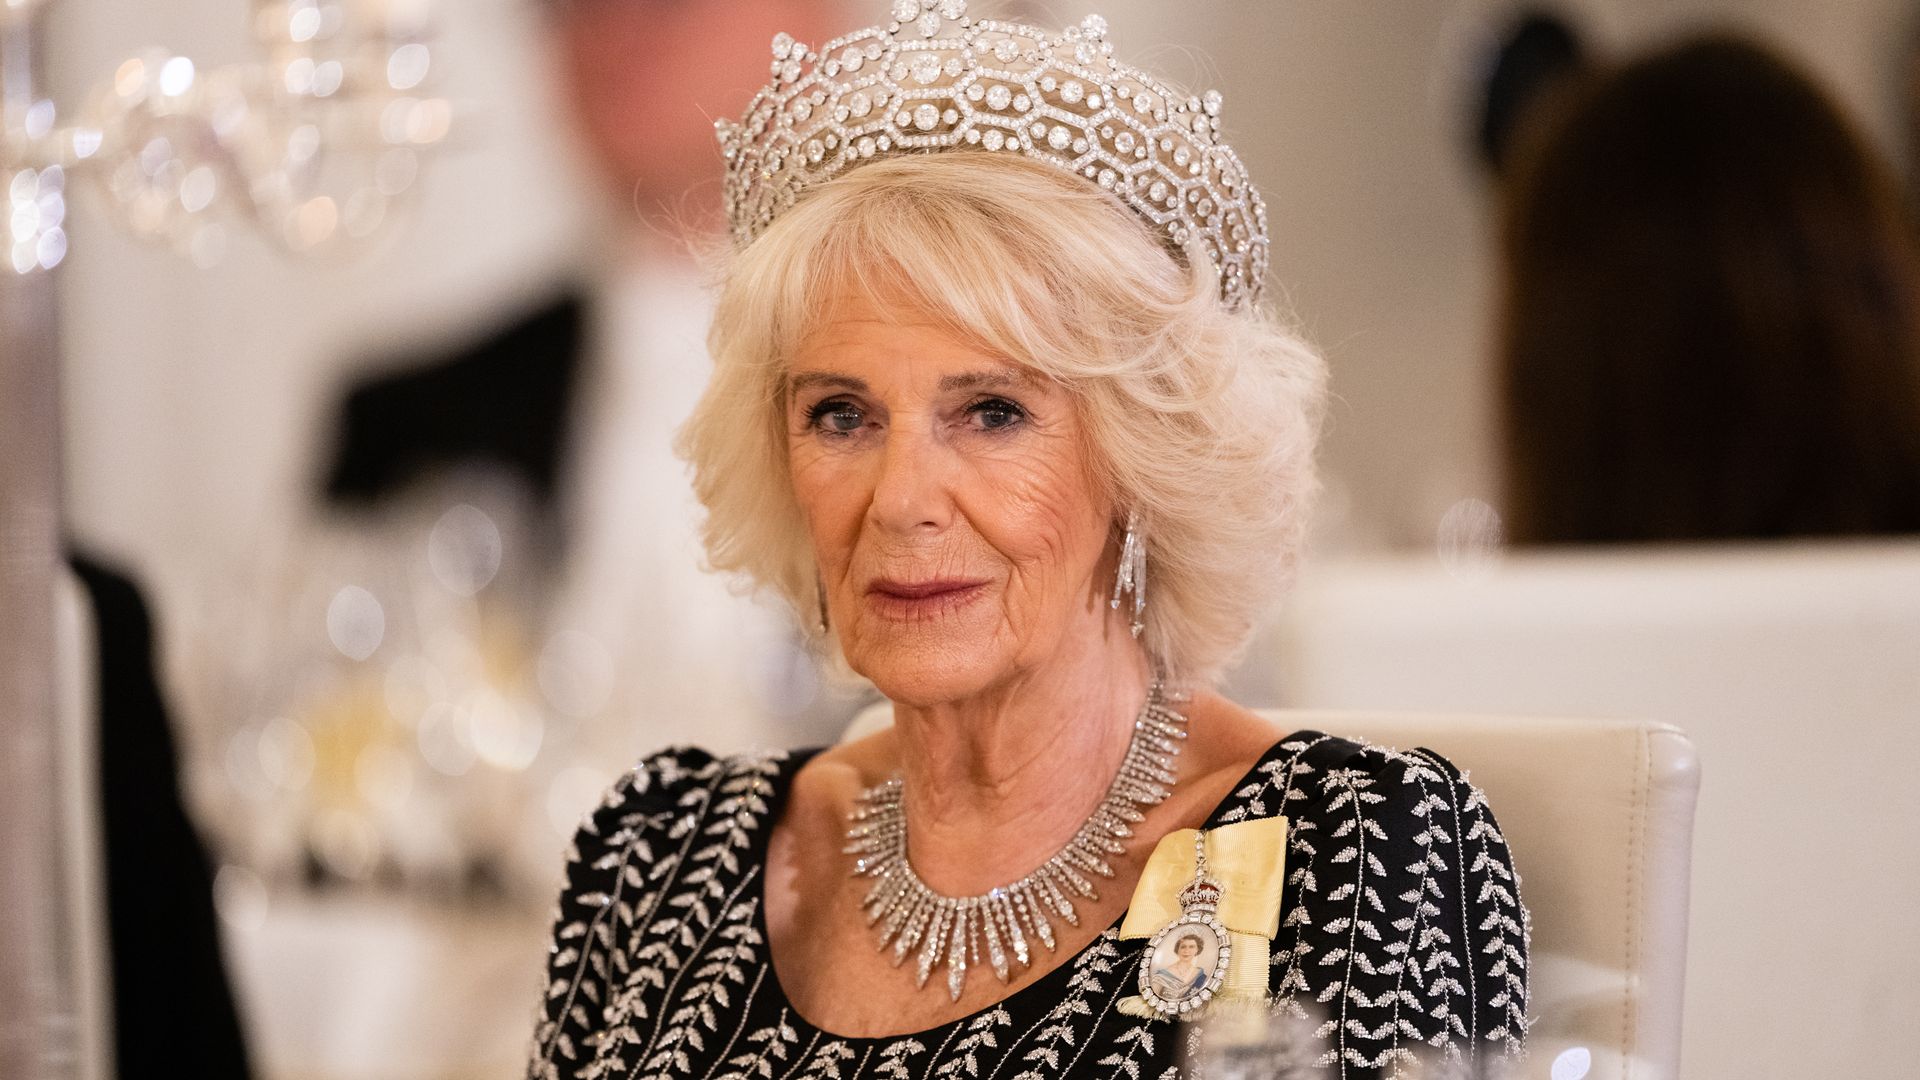  Camilla, Queen Consort attends a State Banquet at Schloss Bellevue, hosted by the President Frank-Walter Steinmeier and his wife